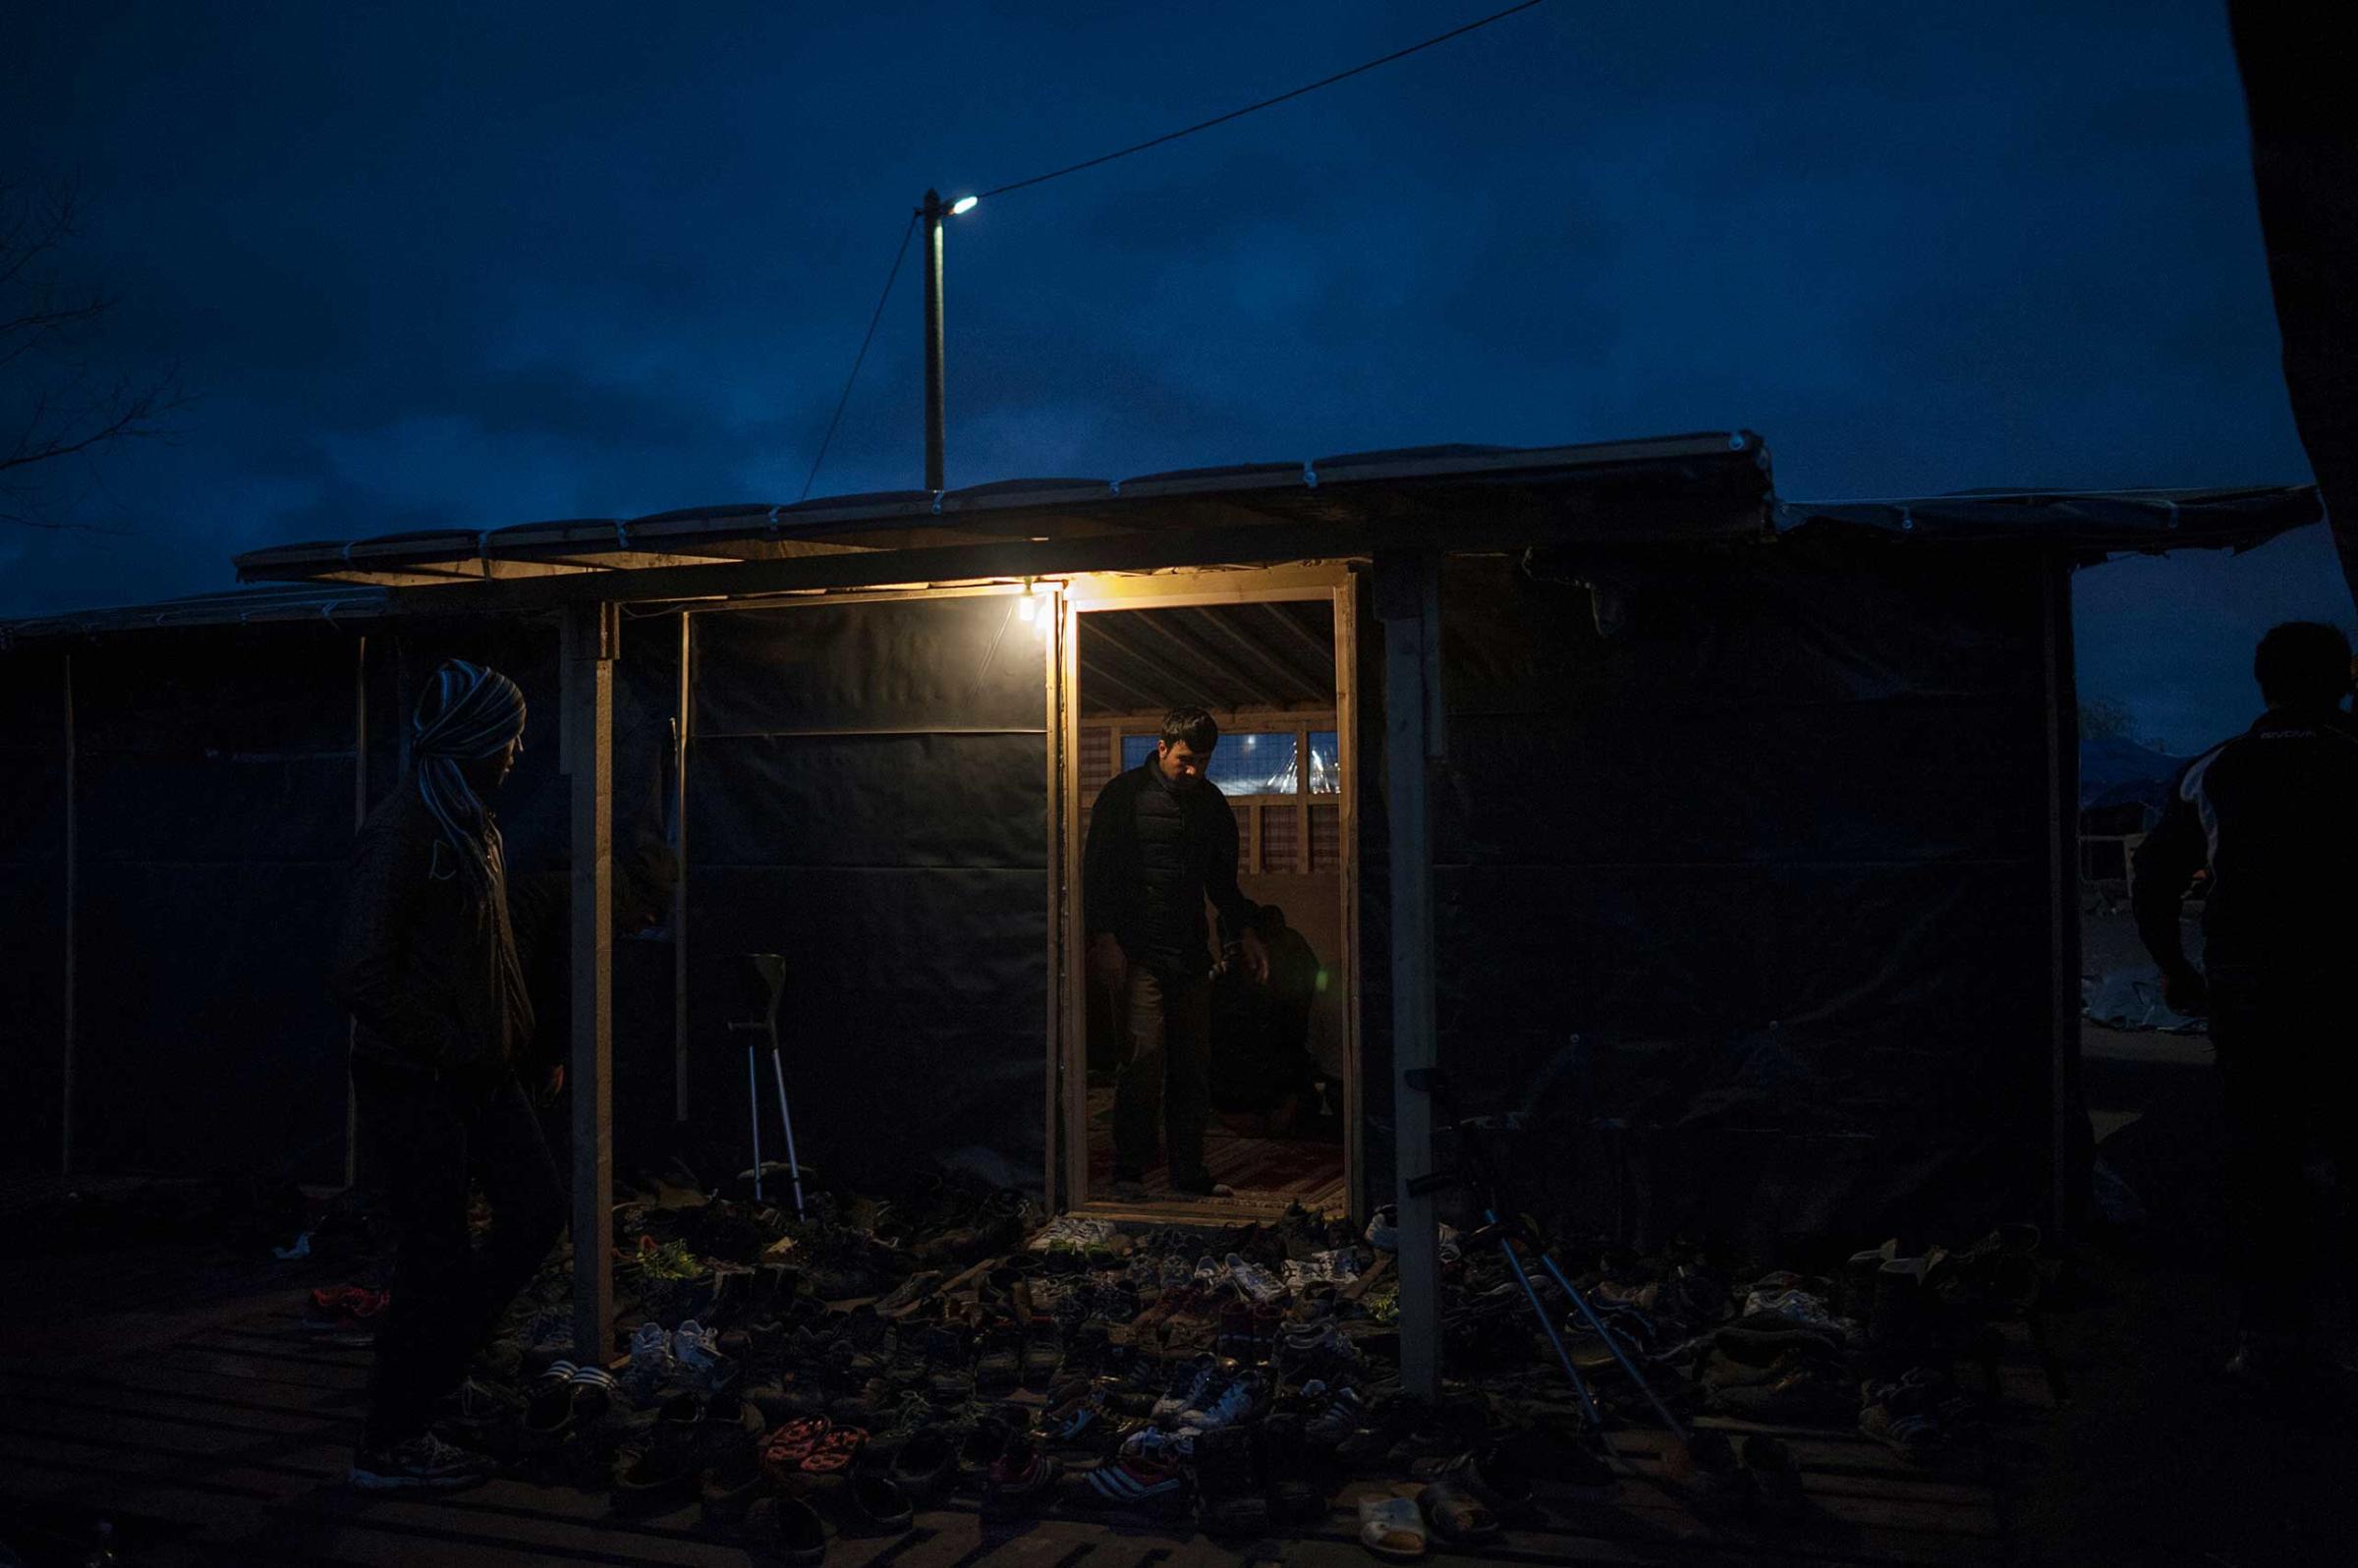 People leave the mosque after Friday pray in Calais, France on Nov. 7, 2015.